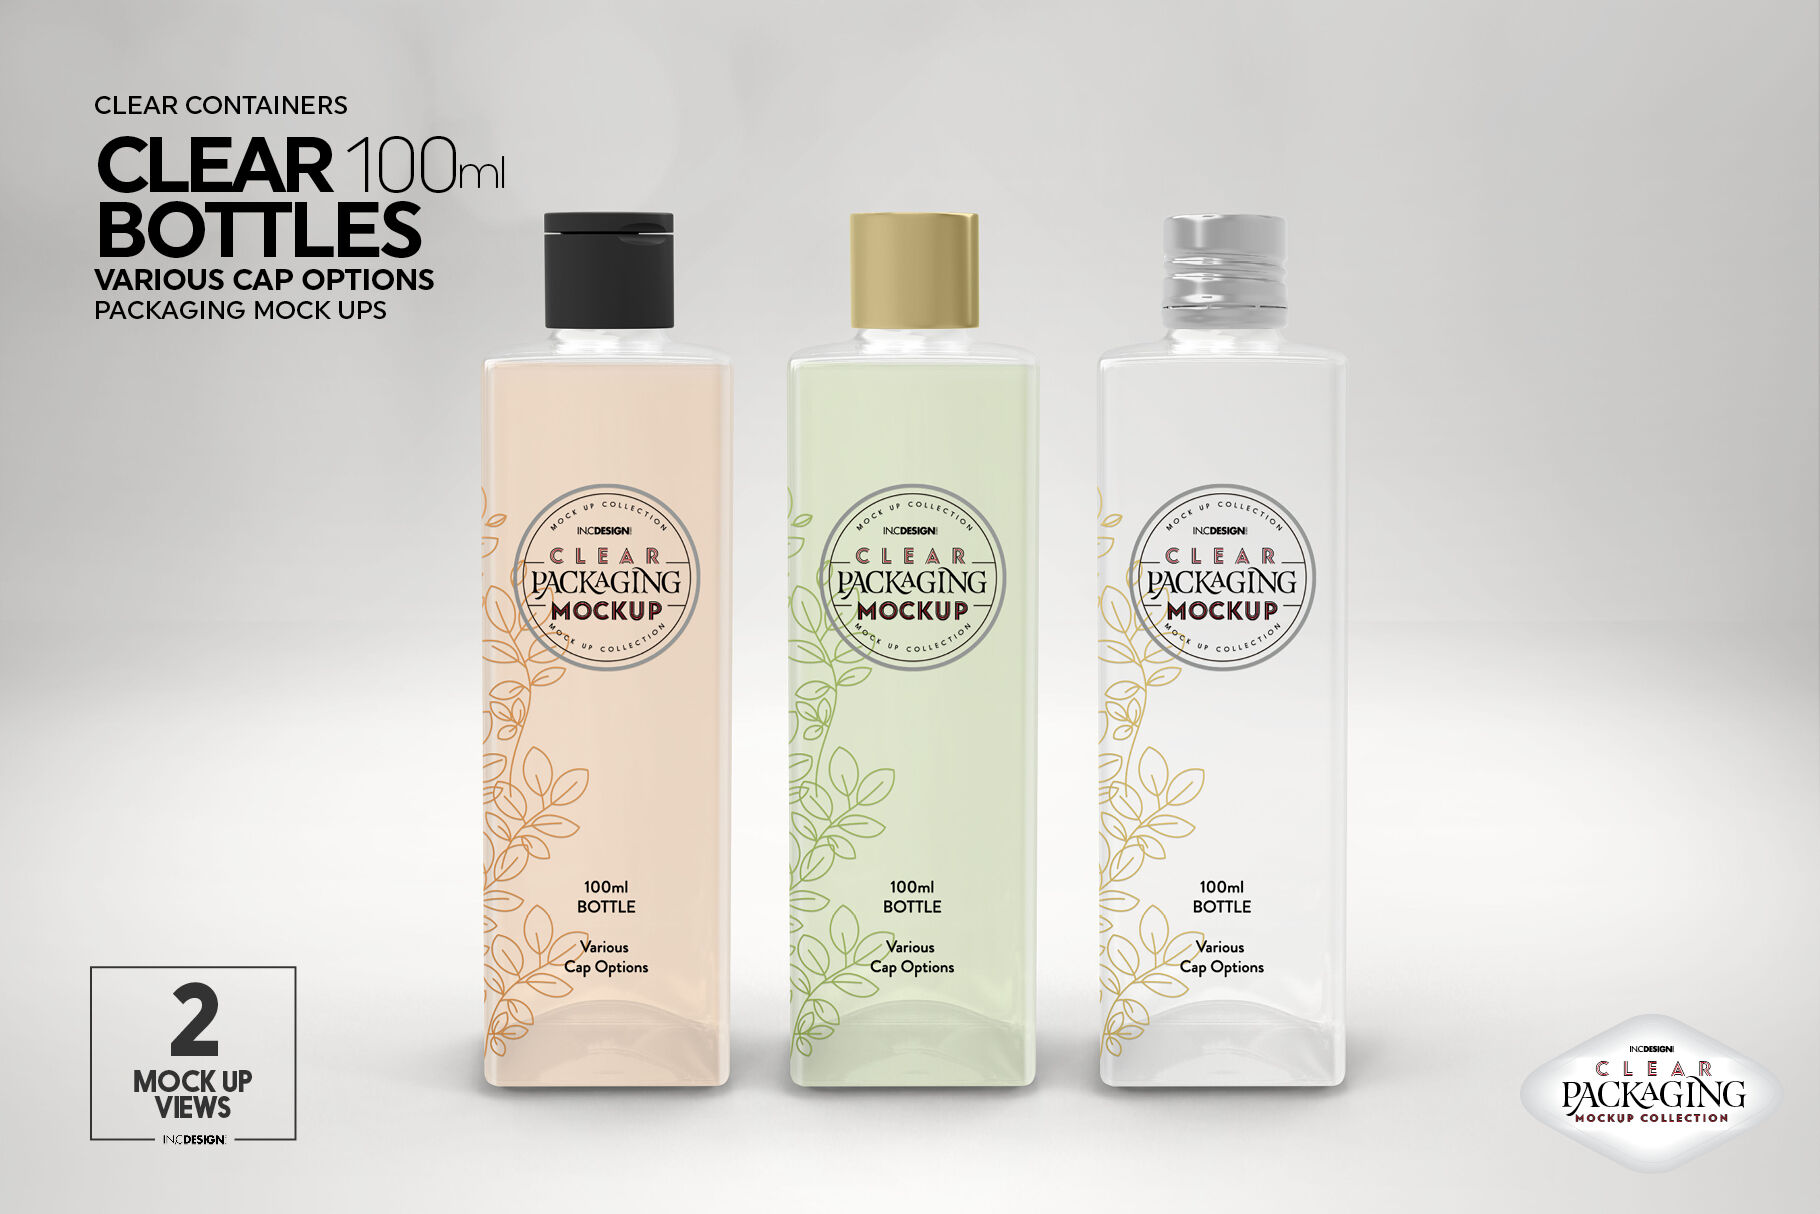 Download Clear 100ml PET Bottles Packaging Mockup By INC Design Studio | TheHungryJPEG.com